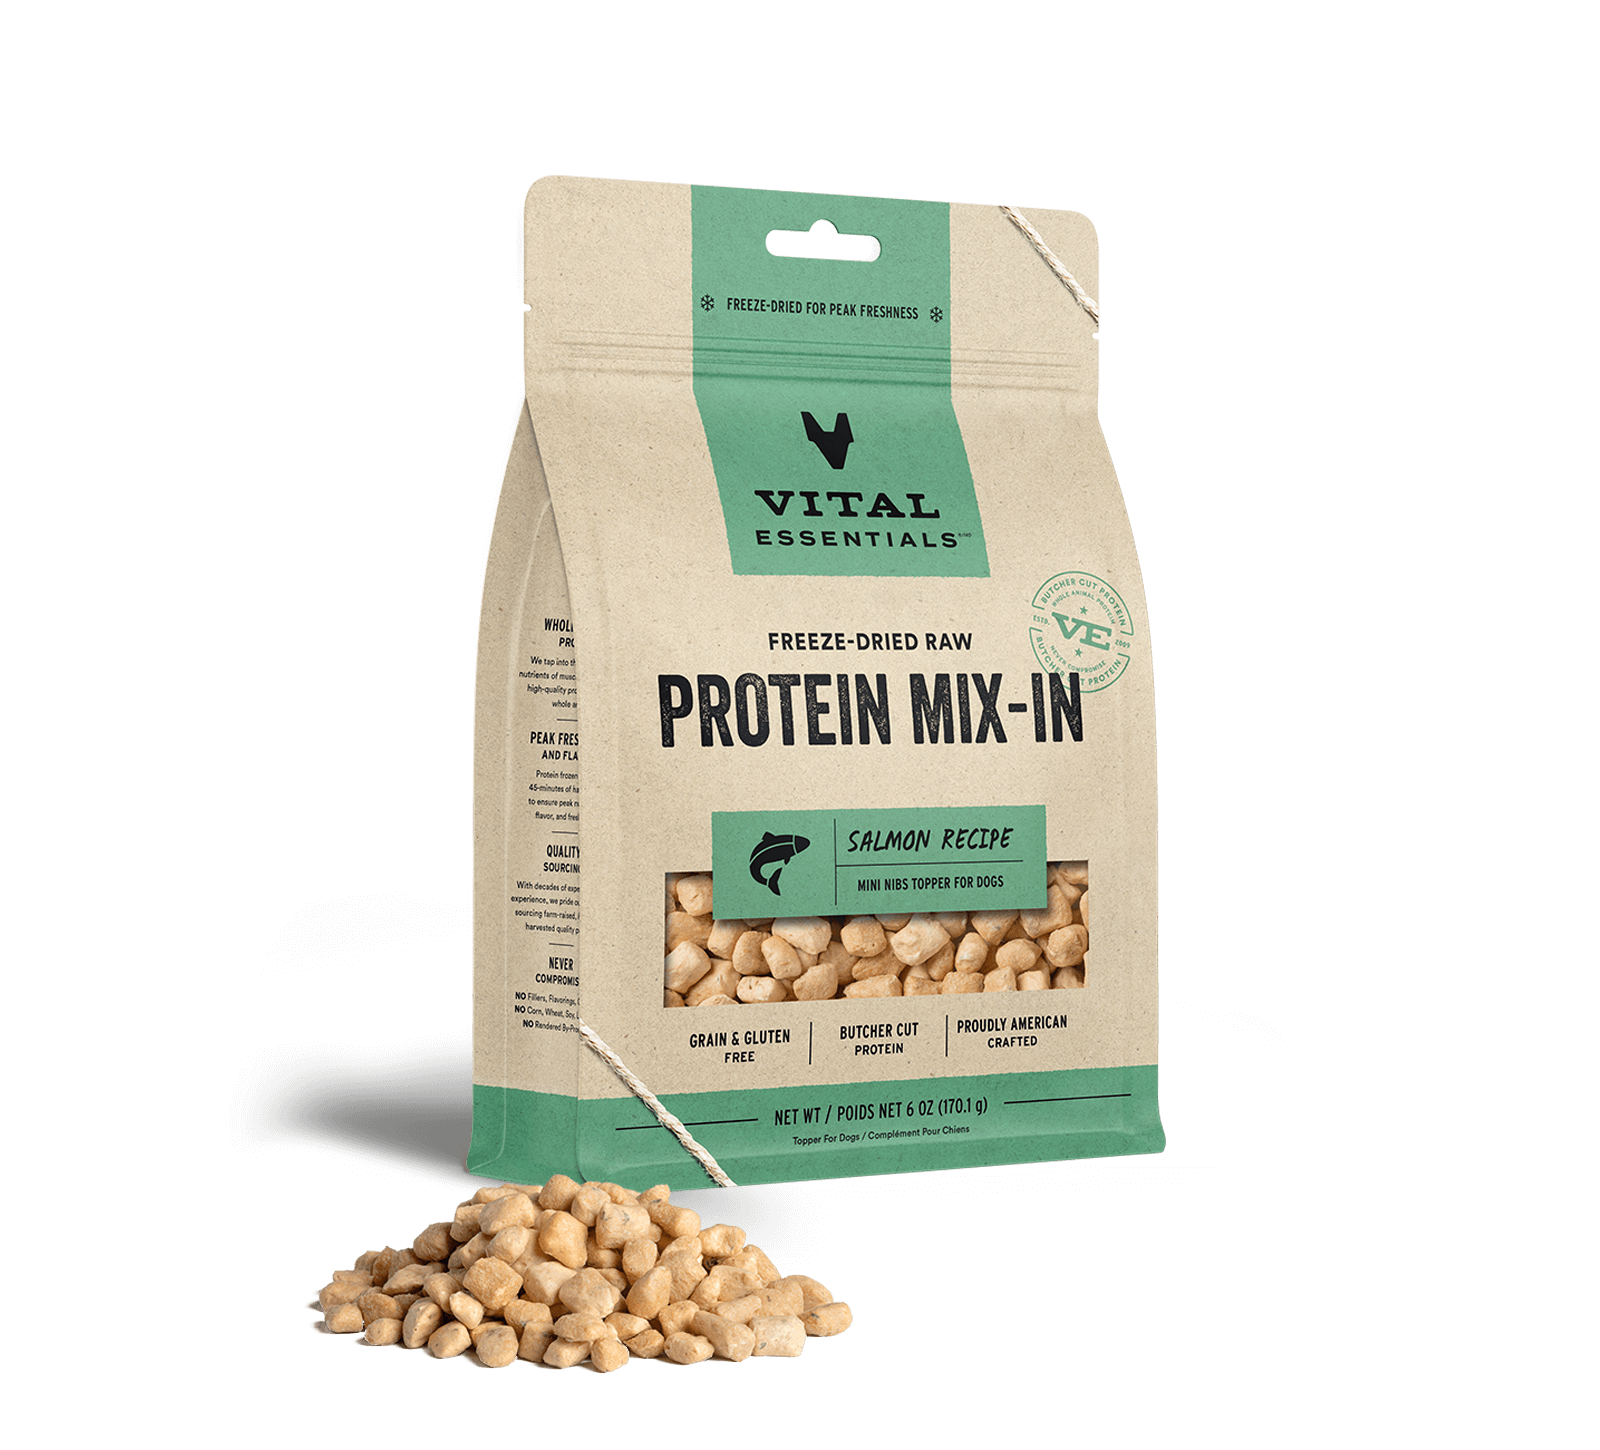 Vital Essentials Freeze-Dried Raw Protein Mix-In Salmon Recipe Mini Nibs Topper for Dogs, 6 oz - Healing/First Aid